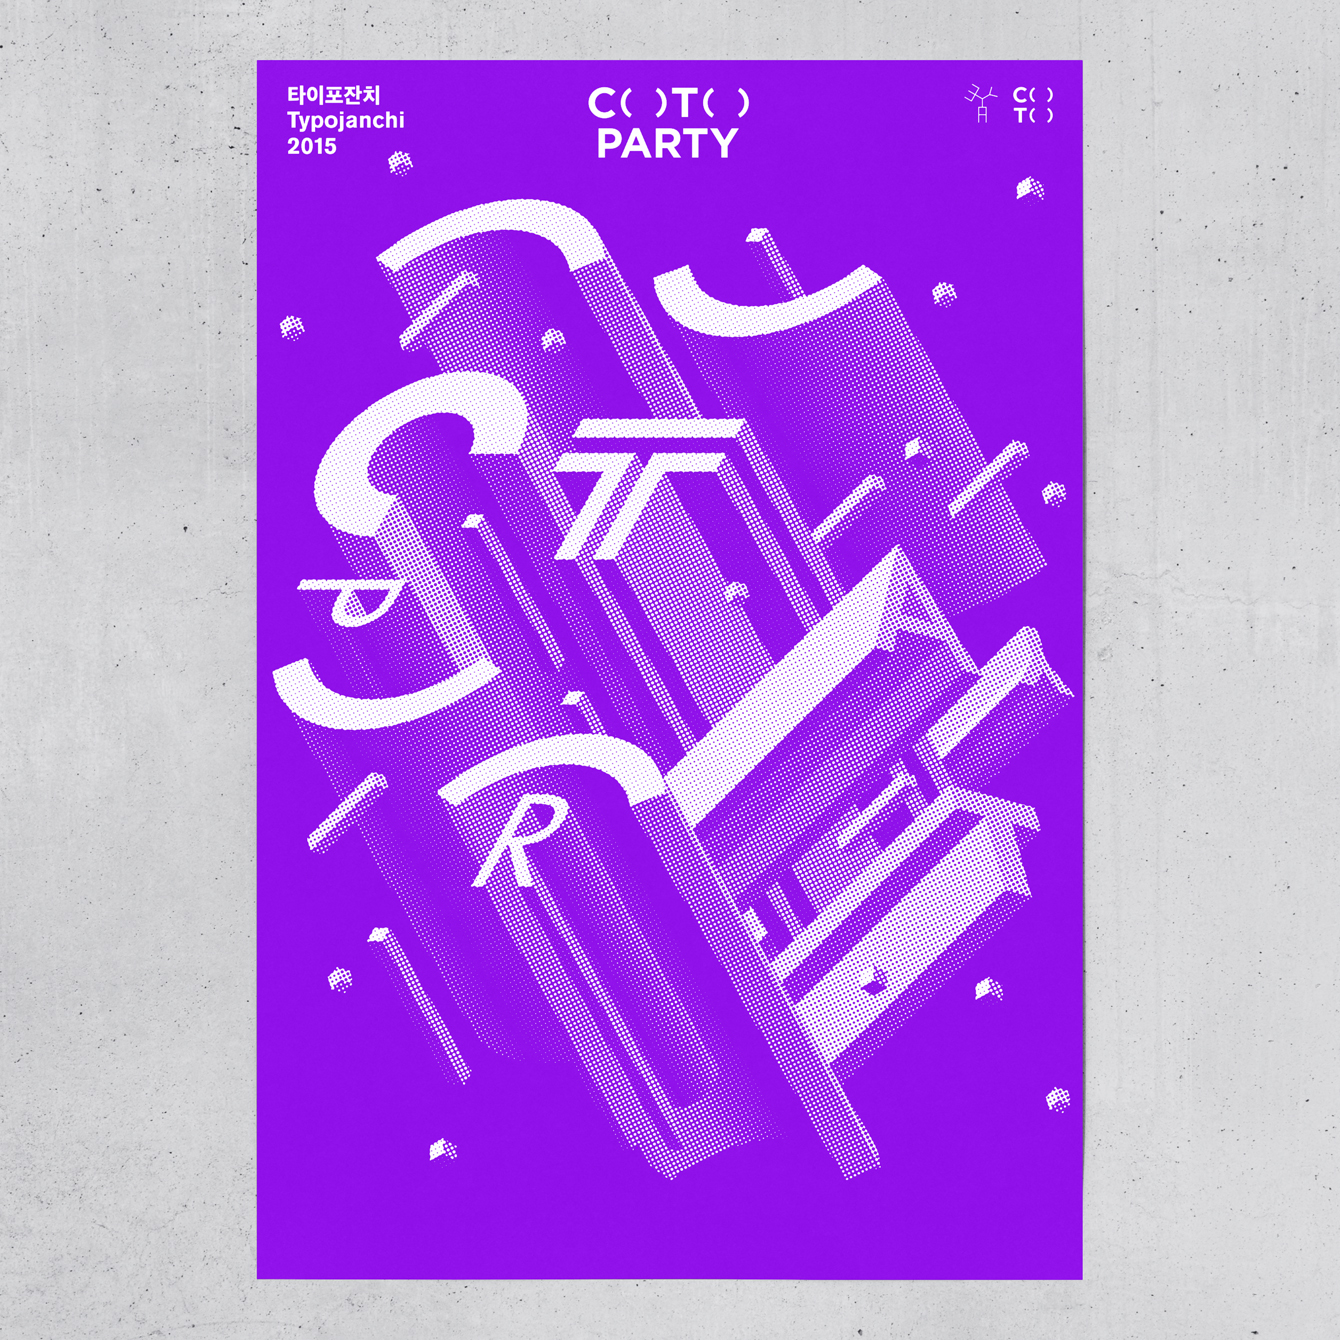 Brand identity and poster design for C( )T( ) – Typojanchi 2015 by Studio fnt, South Korea